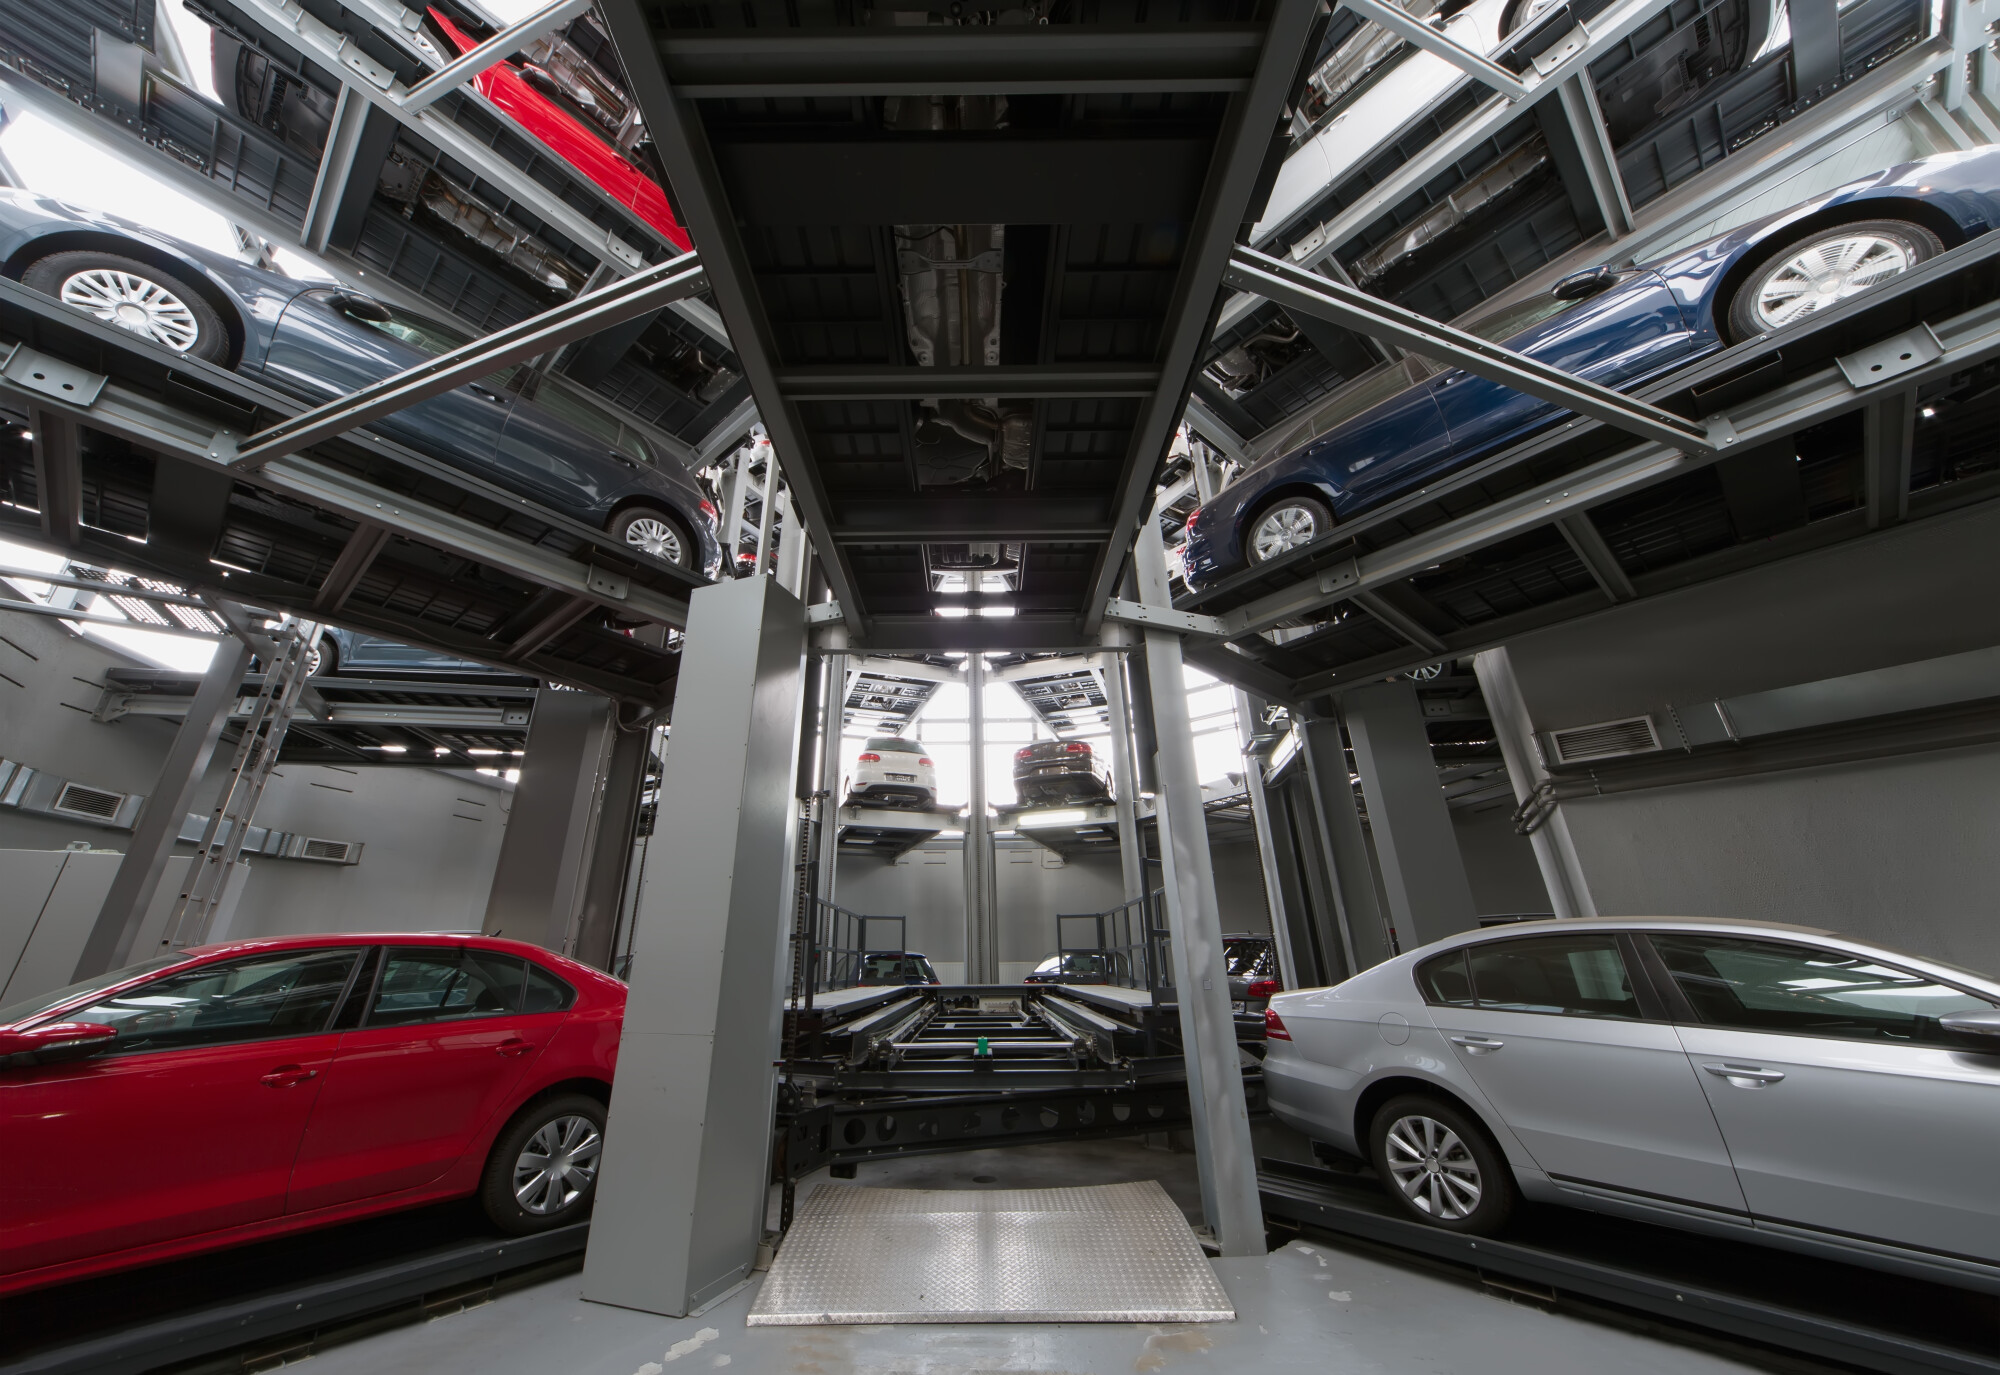 Are you looking for vehicle storage options in Mukilteo, WA? Read about how to choose the right fit for your needs and budget.